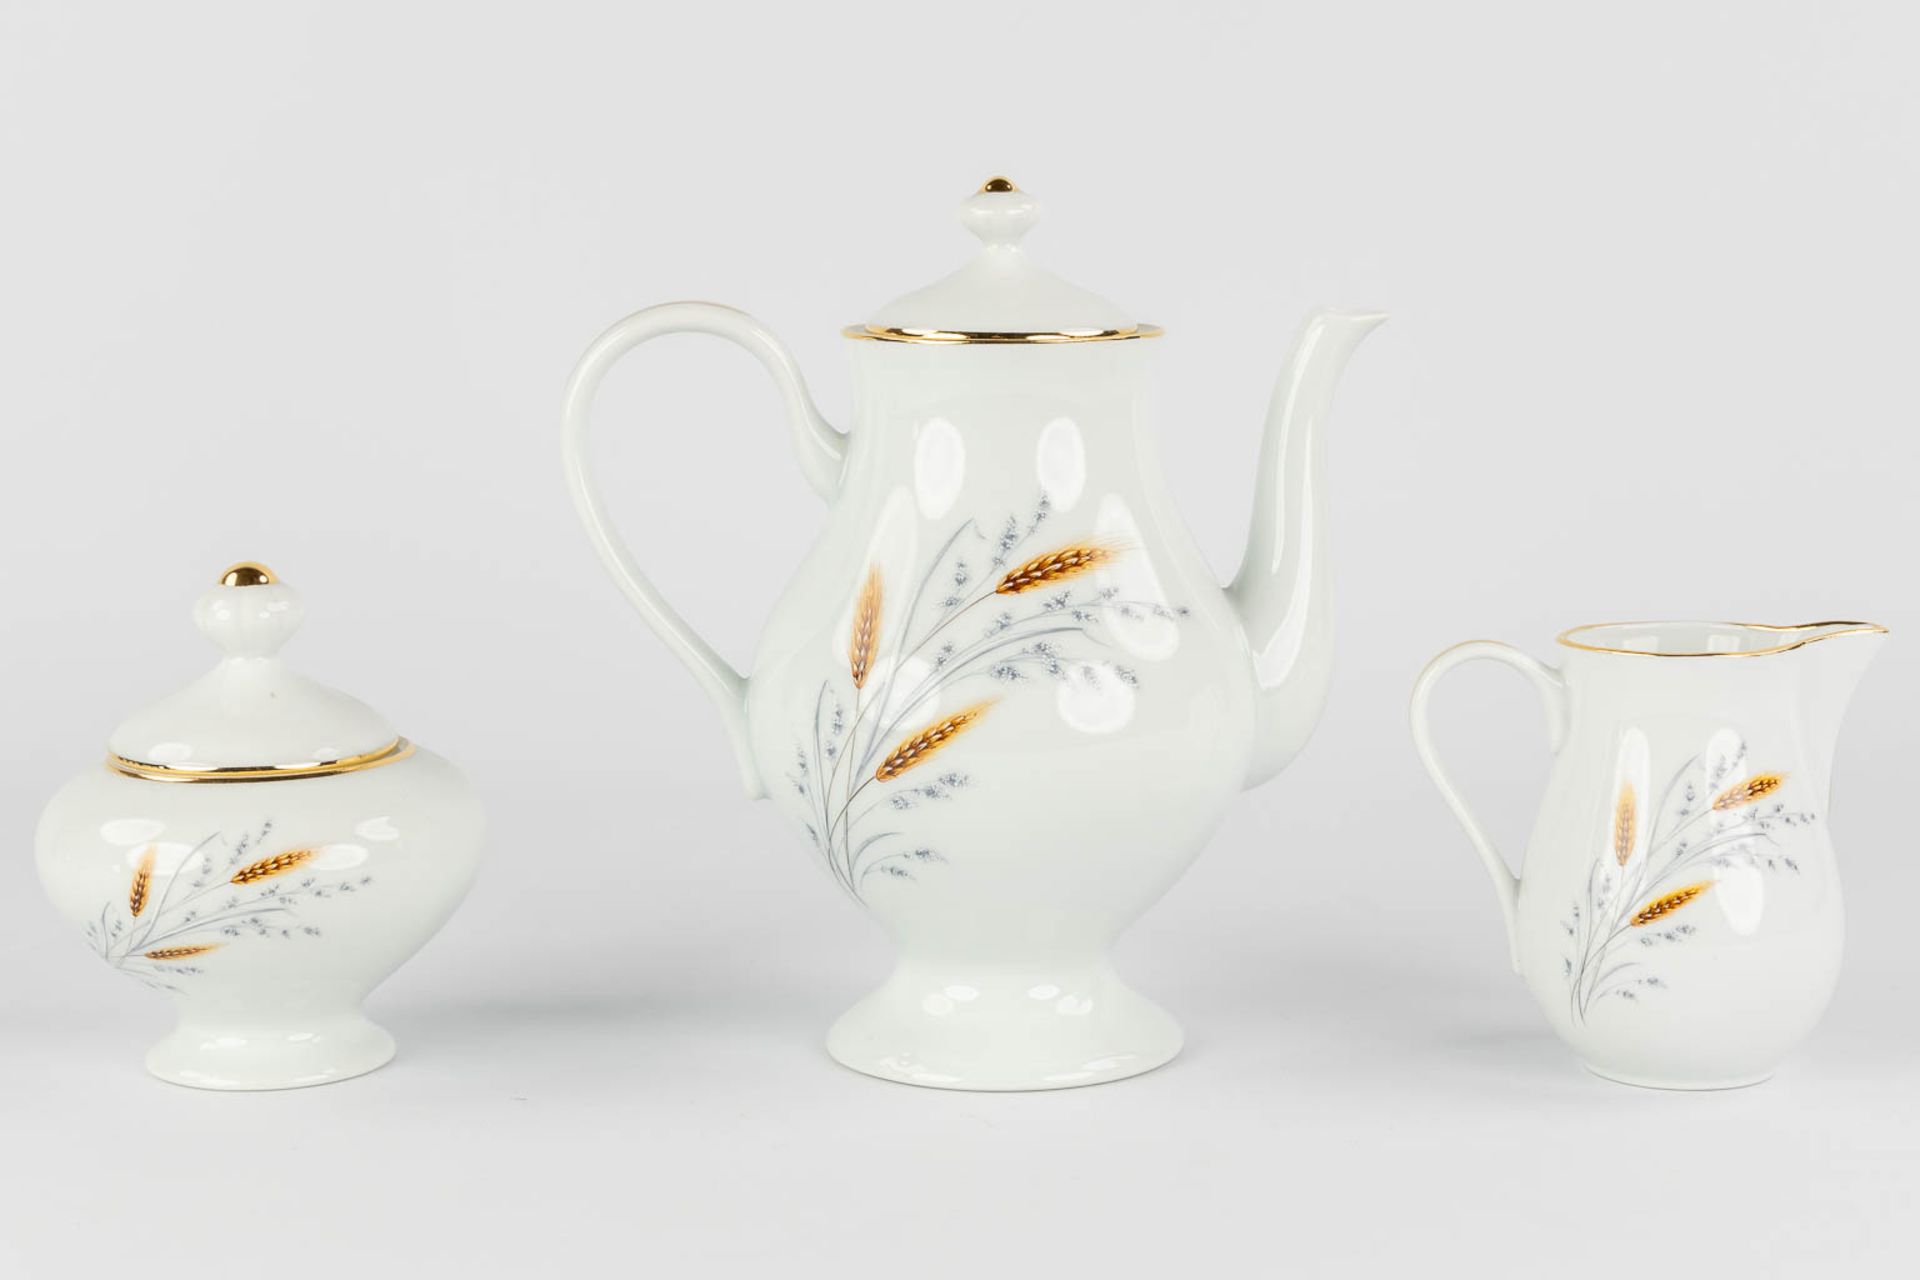 Limoges, France, a large, 12-person dinner, wild and coffee service. (L:23 x W:34 x H:22 cm) - Image 7 of 28